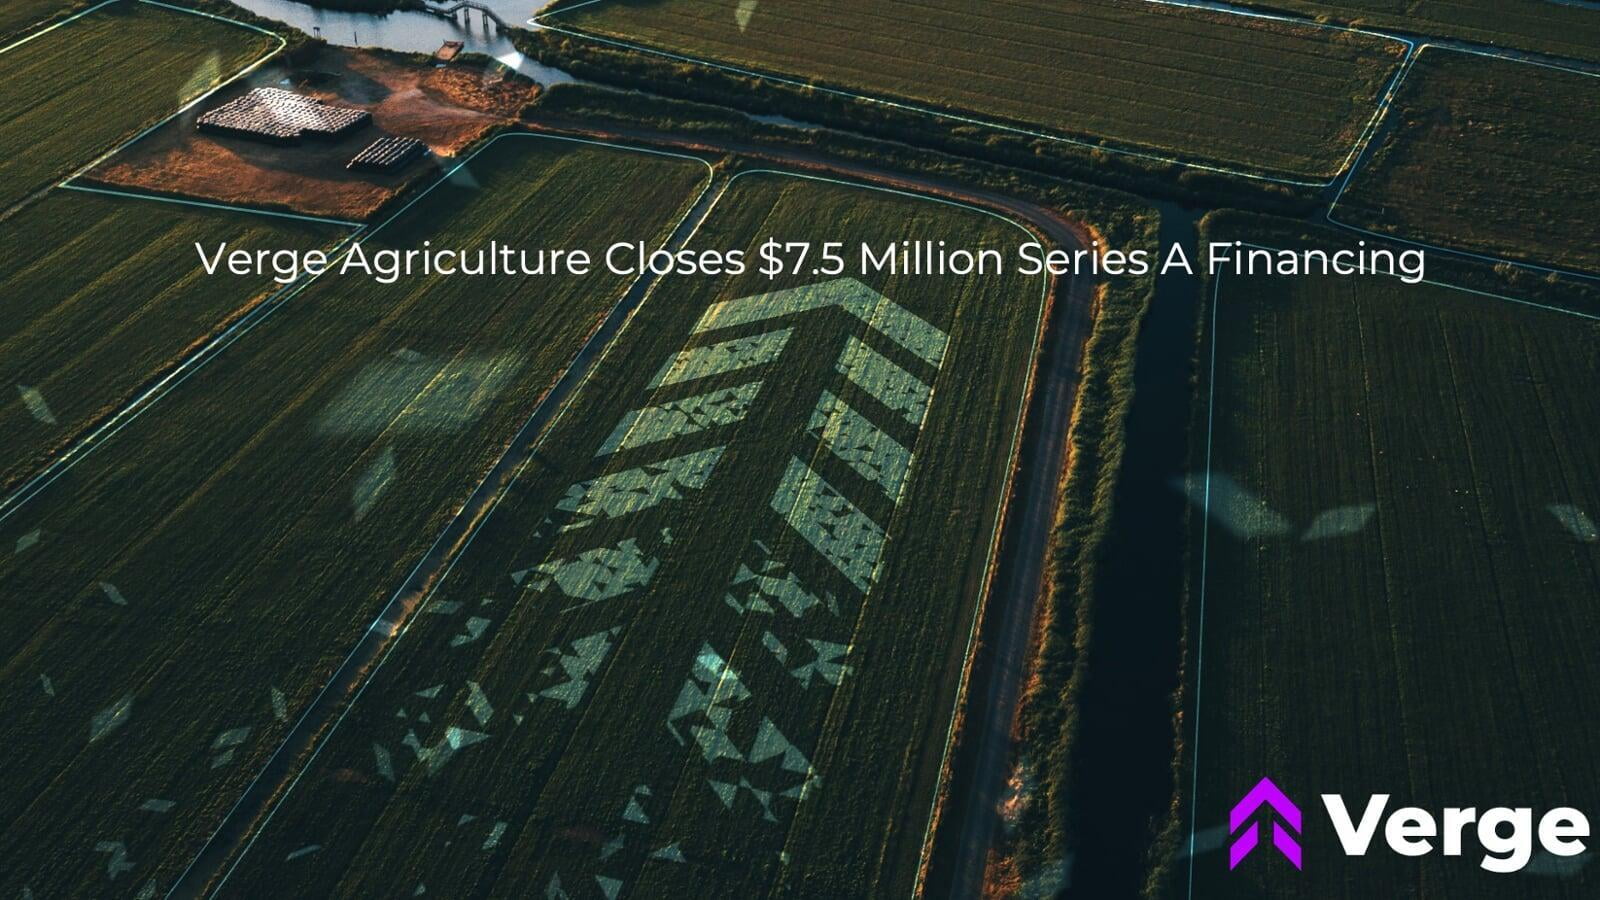 Verge Agriculture Closes $7.5 Million Series A Financing Led by Yamaha Motor Ventures